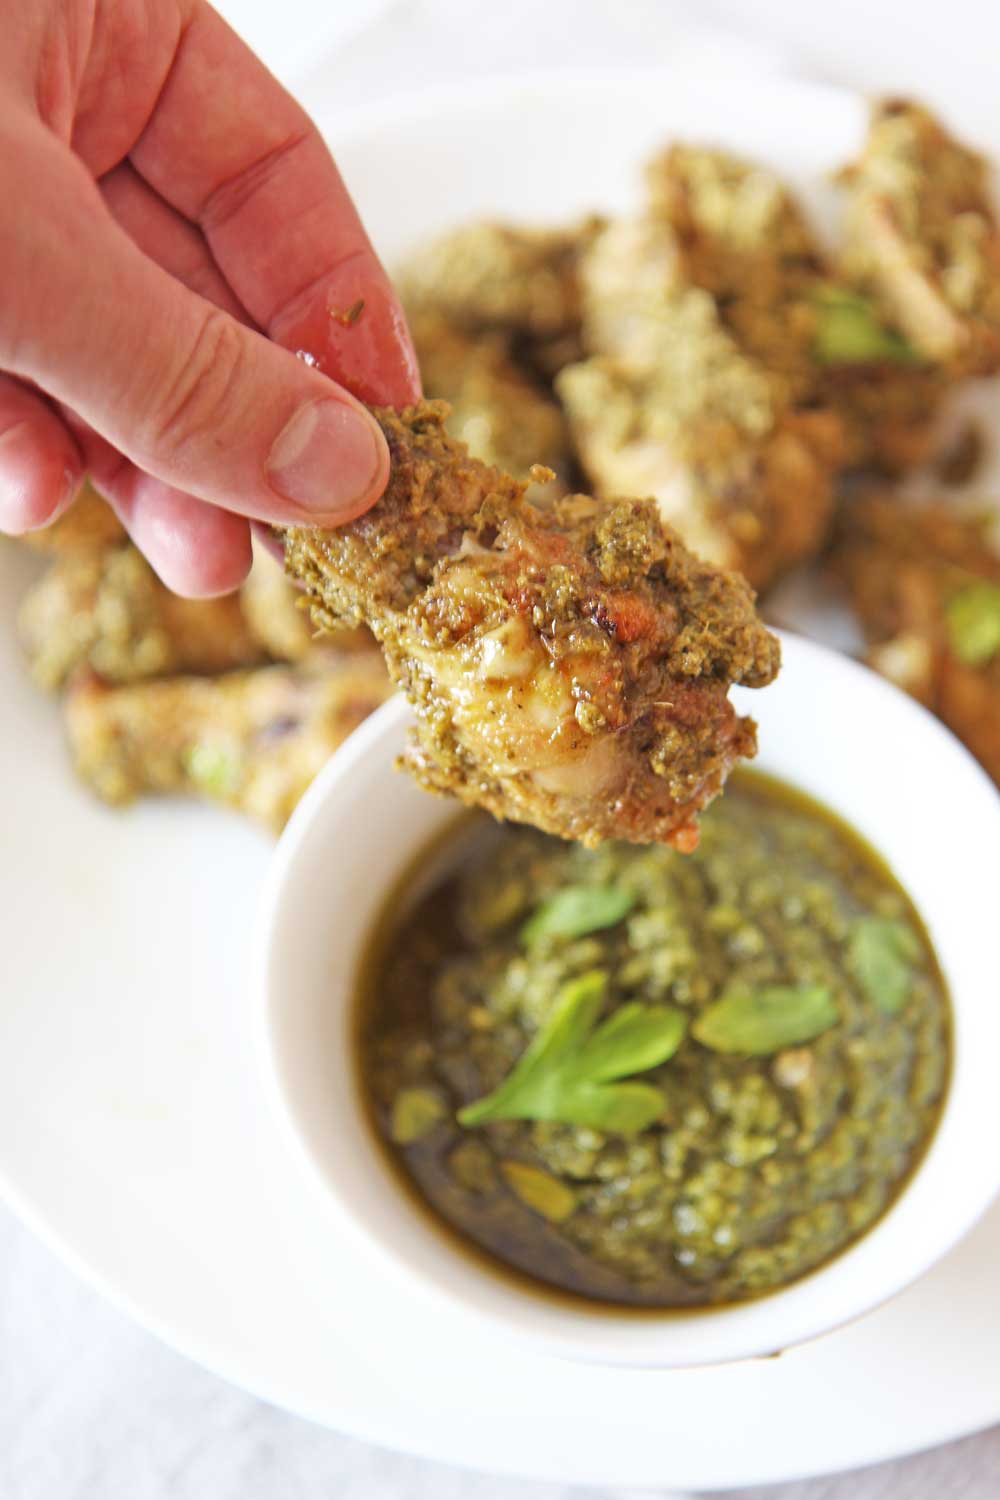 Oven Fried Pesto Chicken Wings. Easy 30 minute wing recipe with easy store bought pesto. www.ChopHappy.com #chickenwings #ovenfriedwings